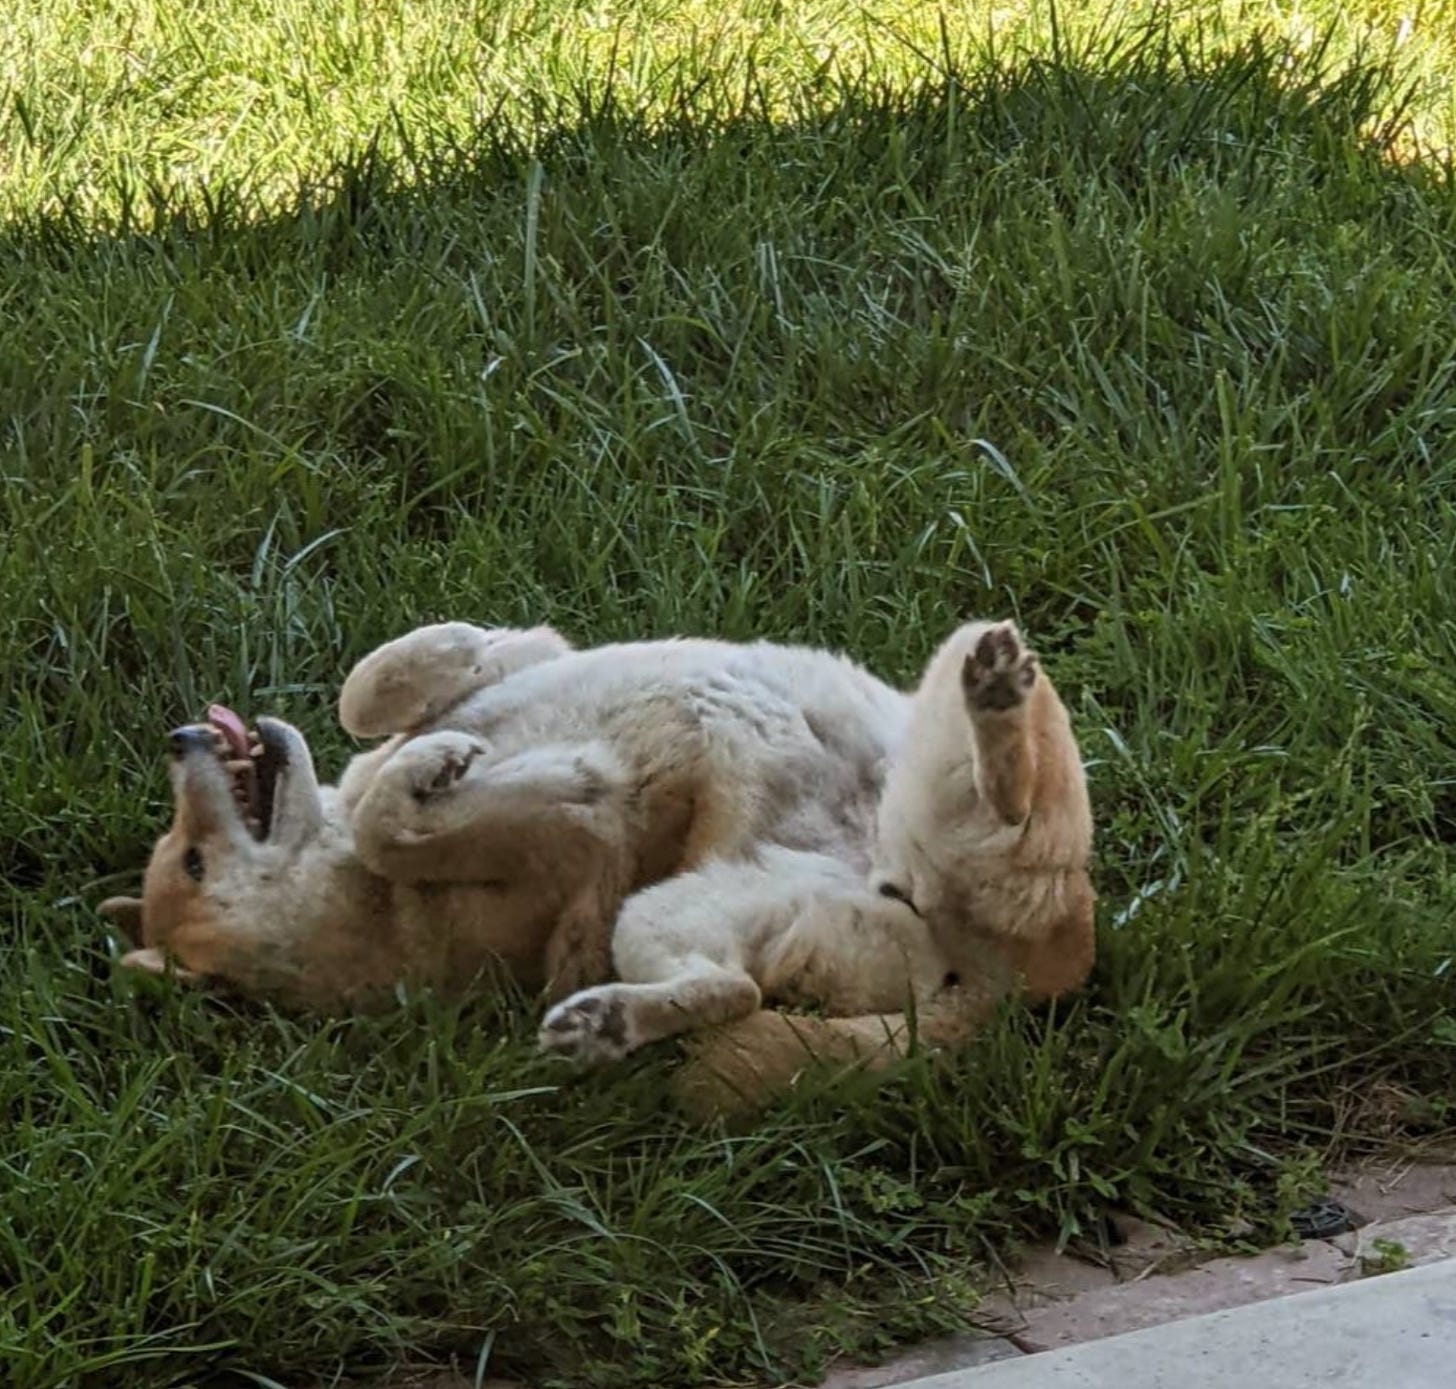 Dog rolling around in grass, free, unfettered, full of life